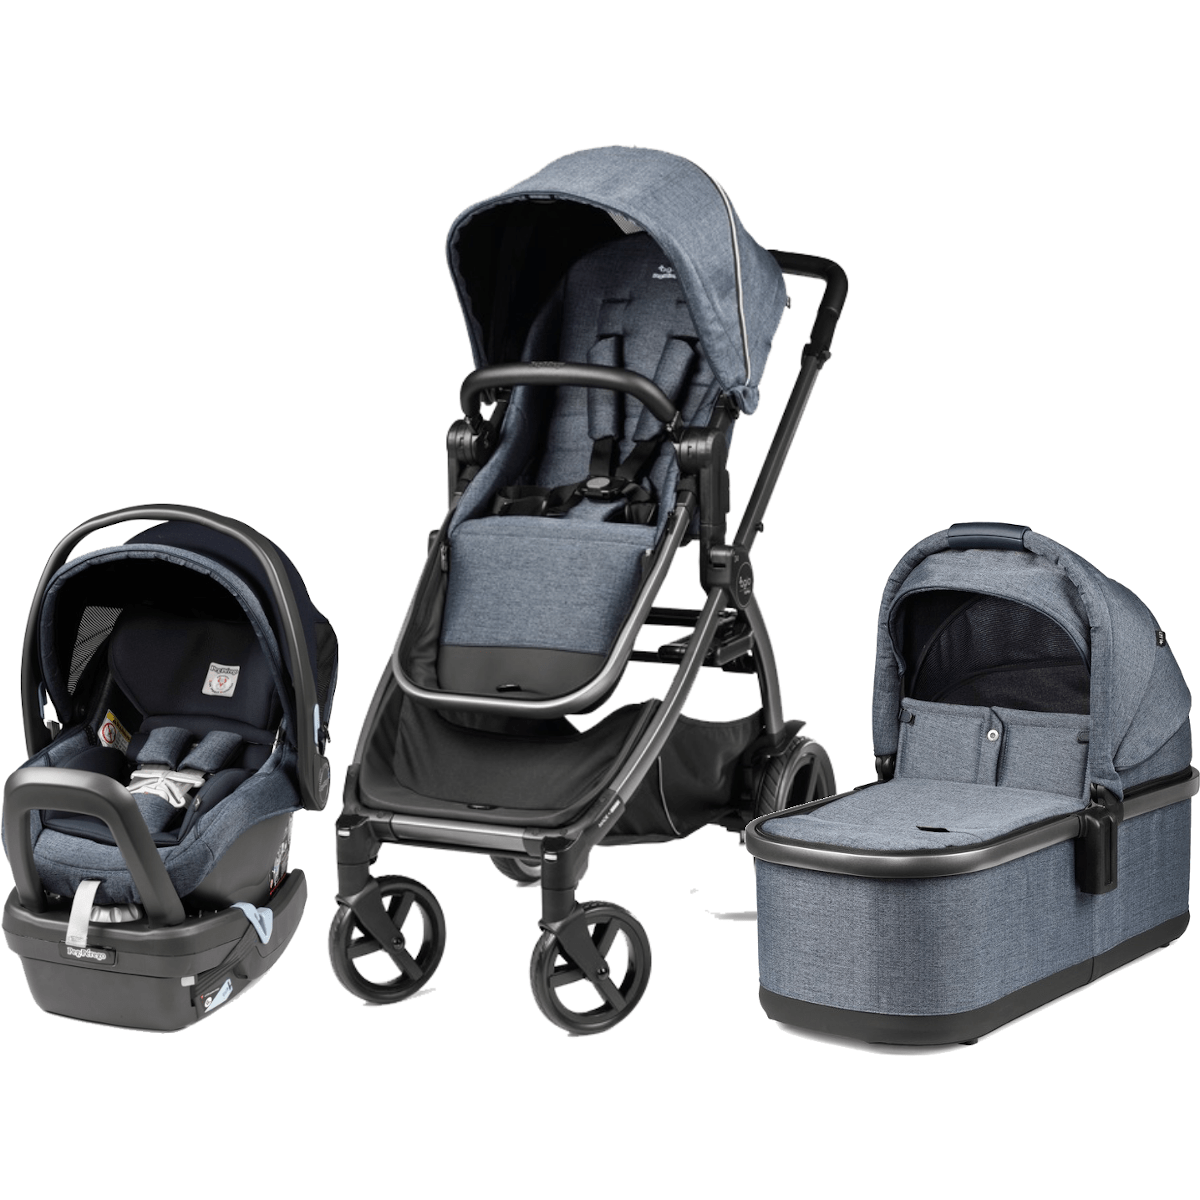 Agio Strollers Agio Luxe Mirage Agio Z4 Stroller Travel System Complete with Bassinet